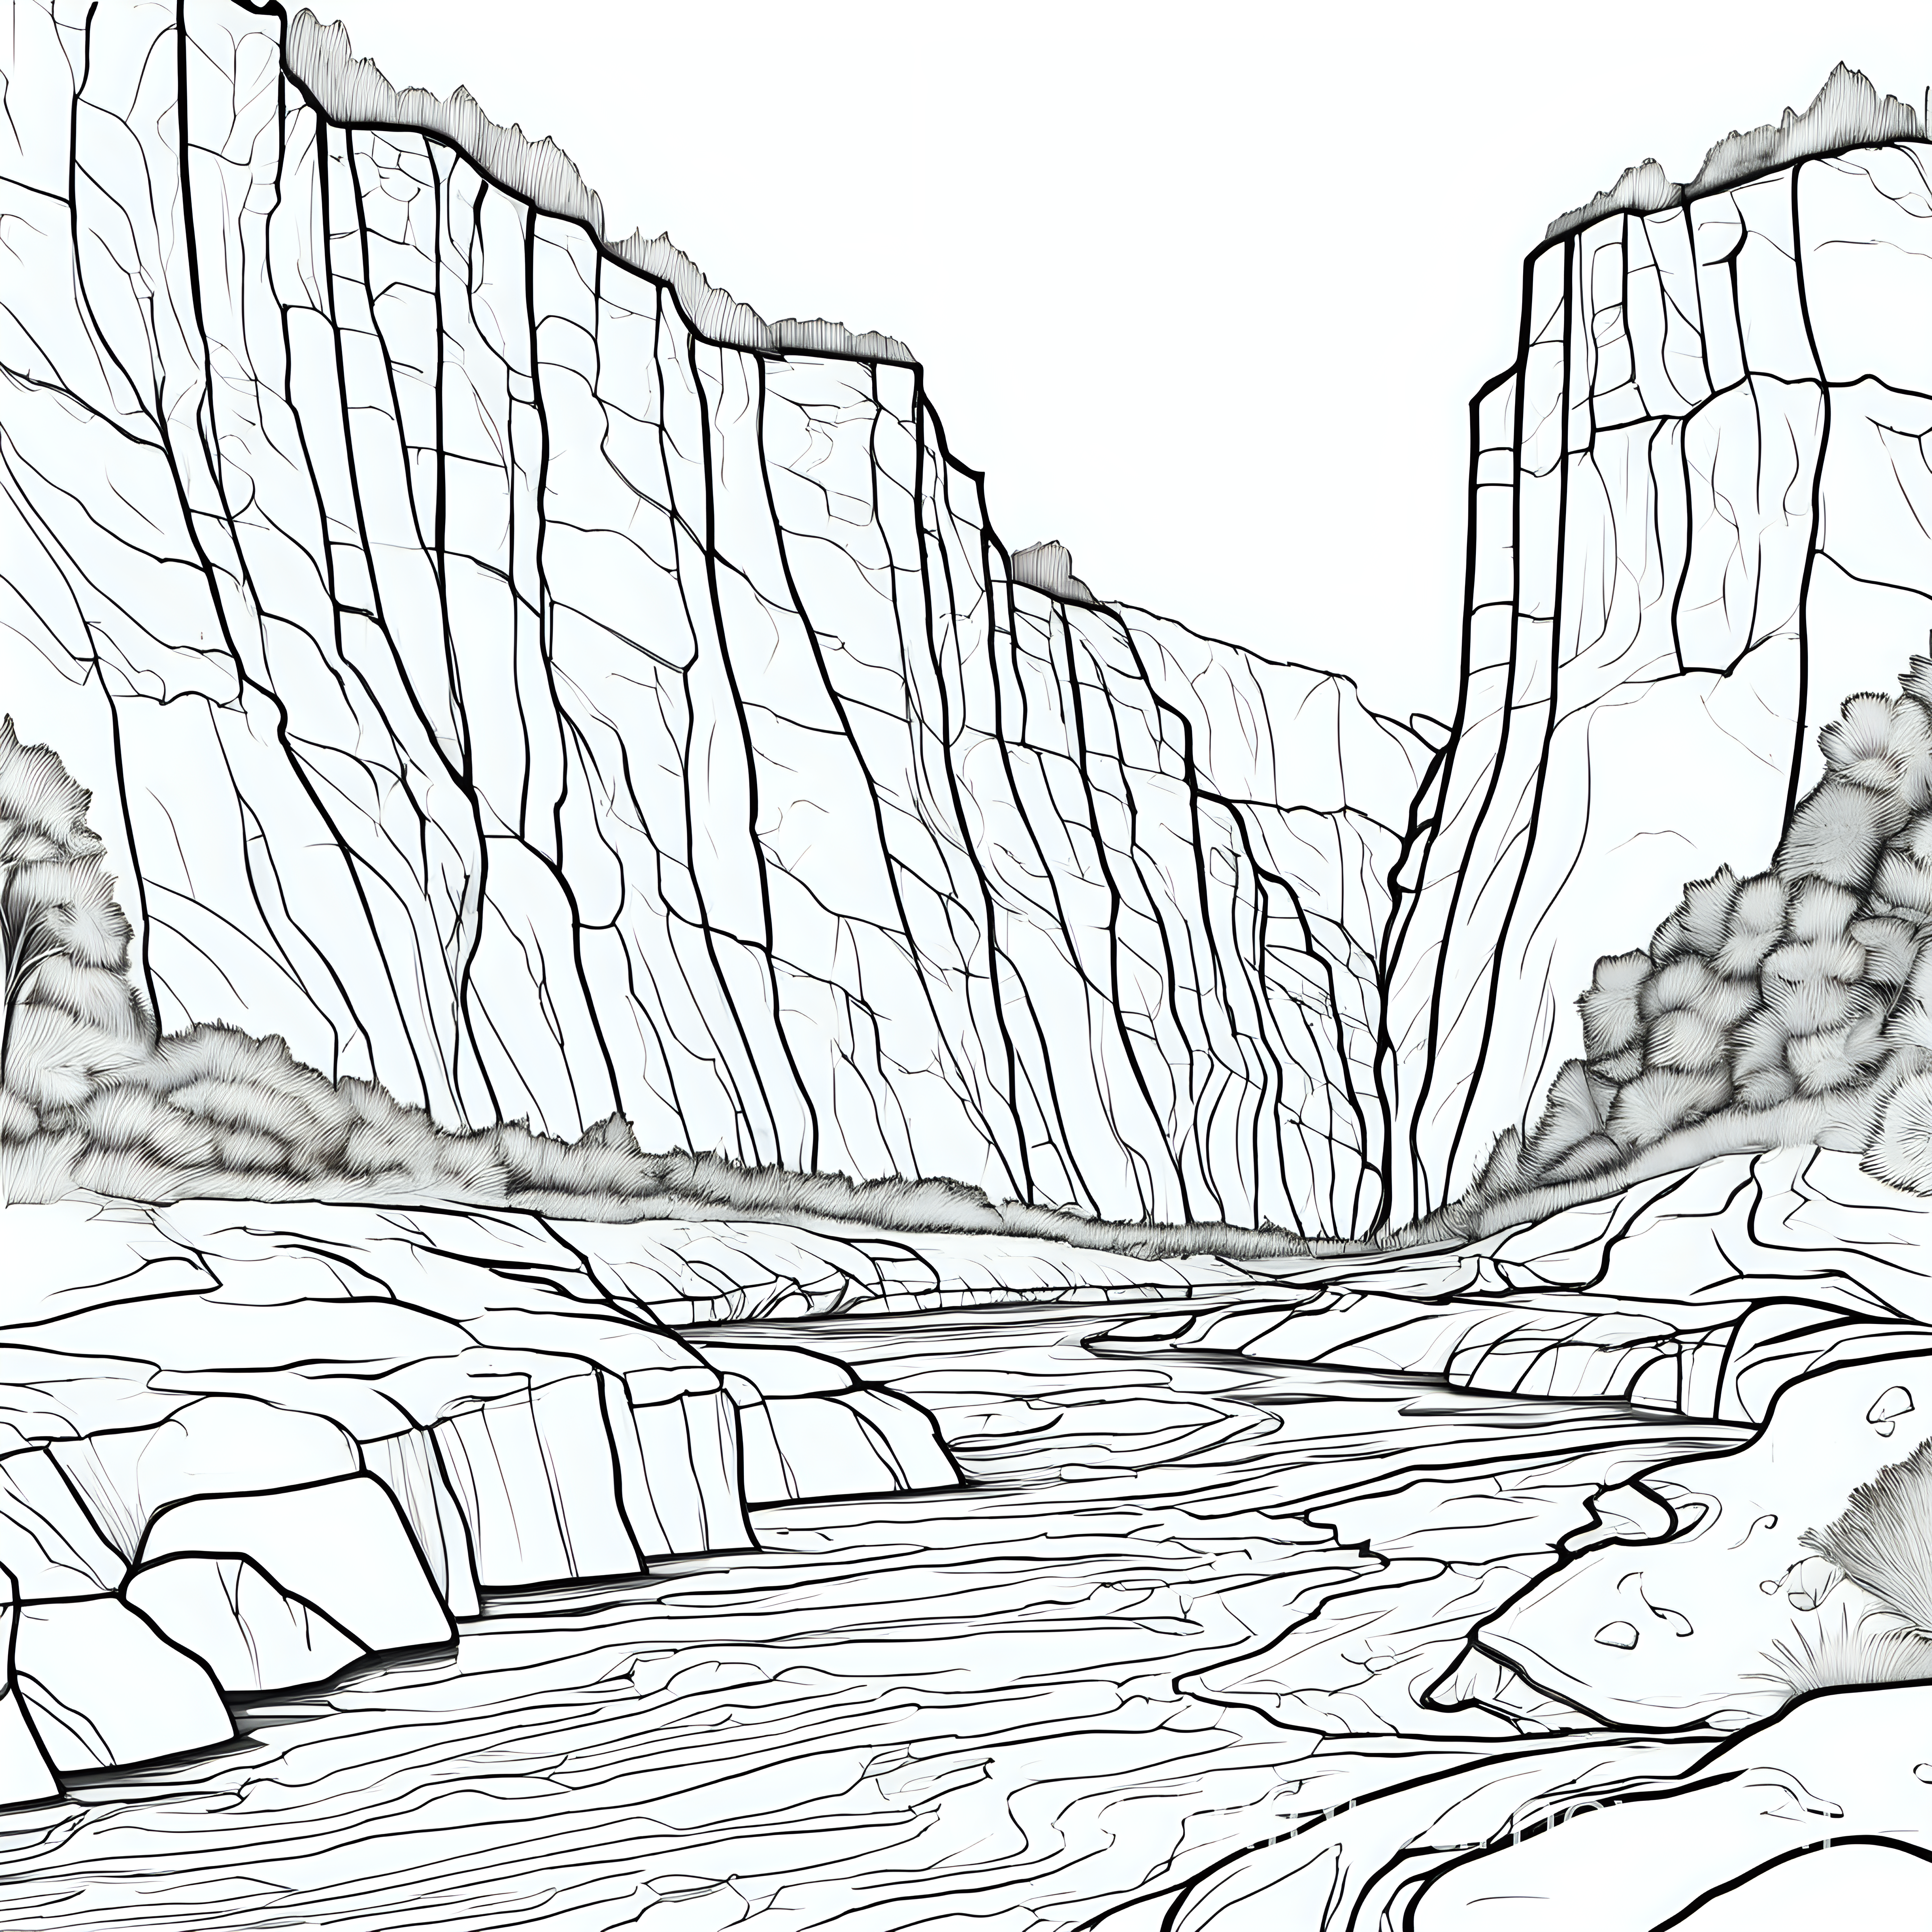 a coloring page that shows erosion along a river back with steep cliffs, low details